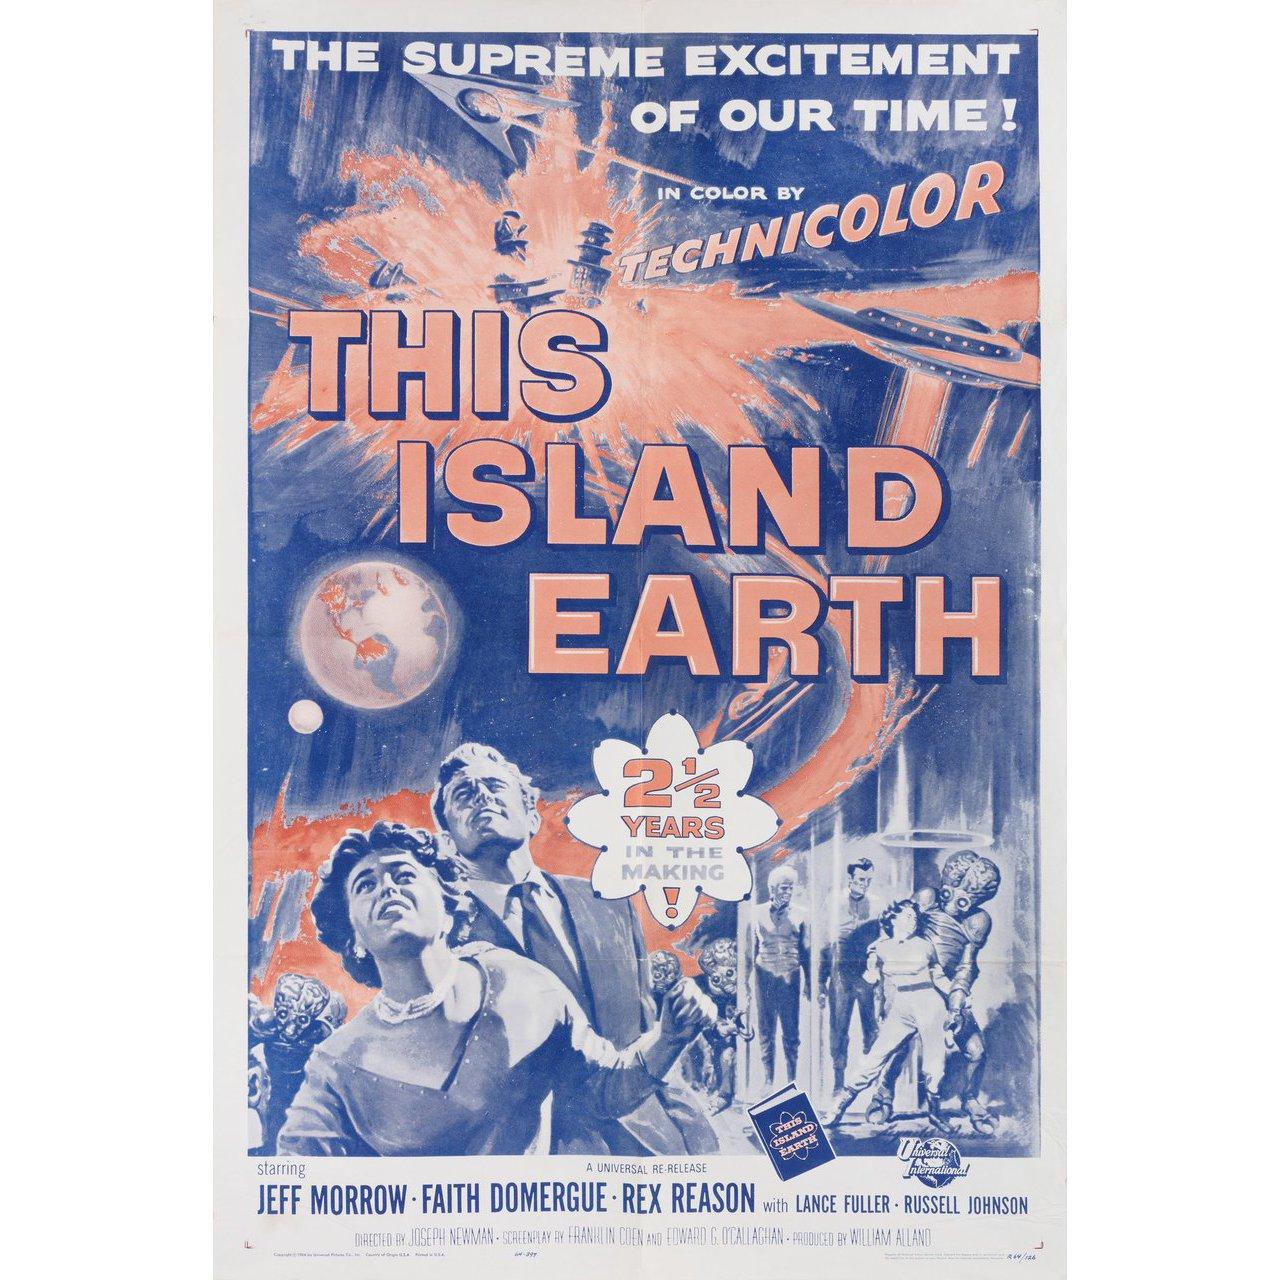 Original 1964 re-release U.S. one sheet poster for the 1955 film This Island Earth directed by Joseph M. Newman / Jack Arnold with Jeff Morrow / Faith Domergue / Rex Reason / Lance Fuller. Very Good condition, folded with wrinkles at bottom. Many